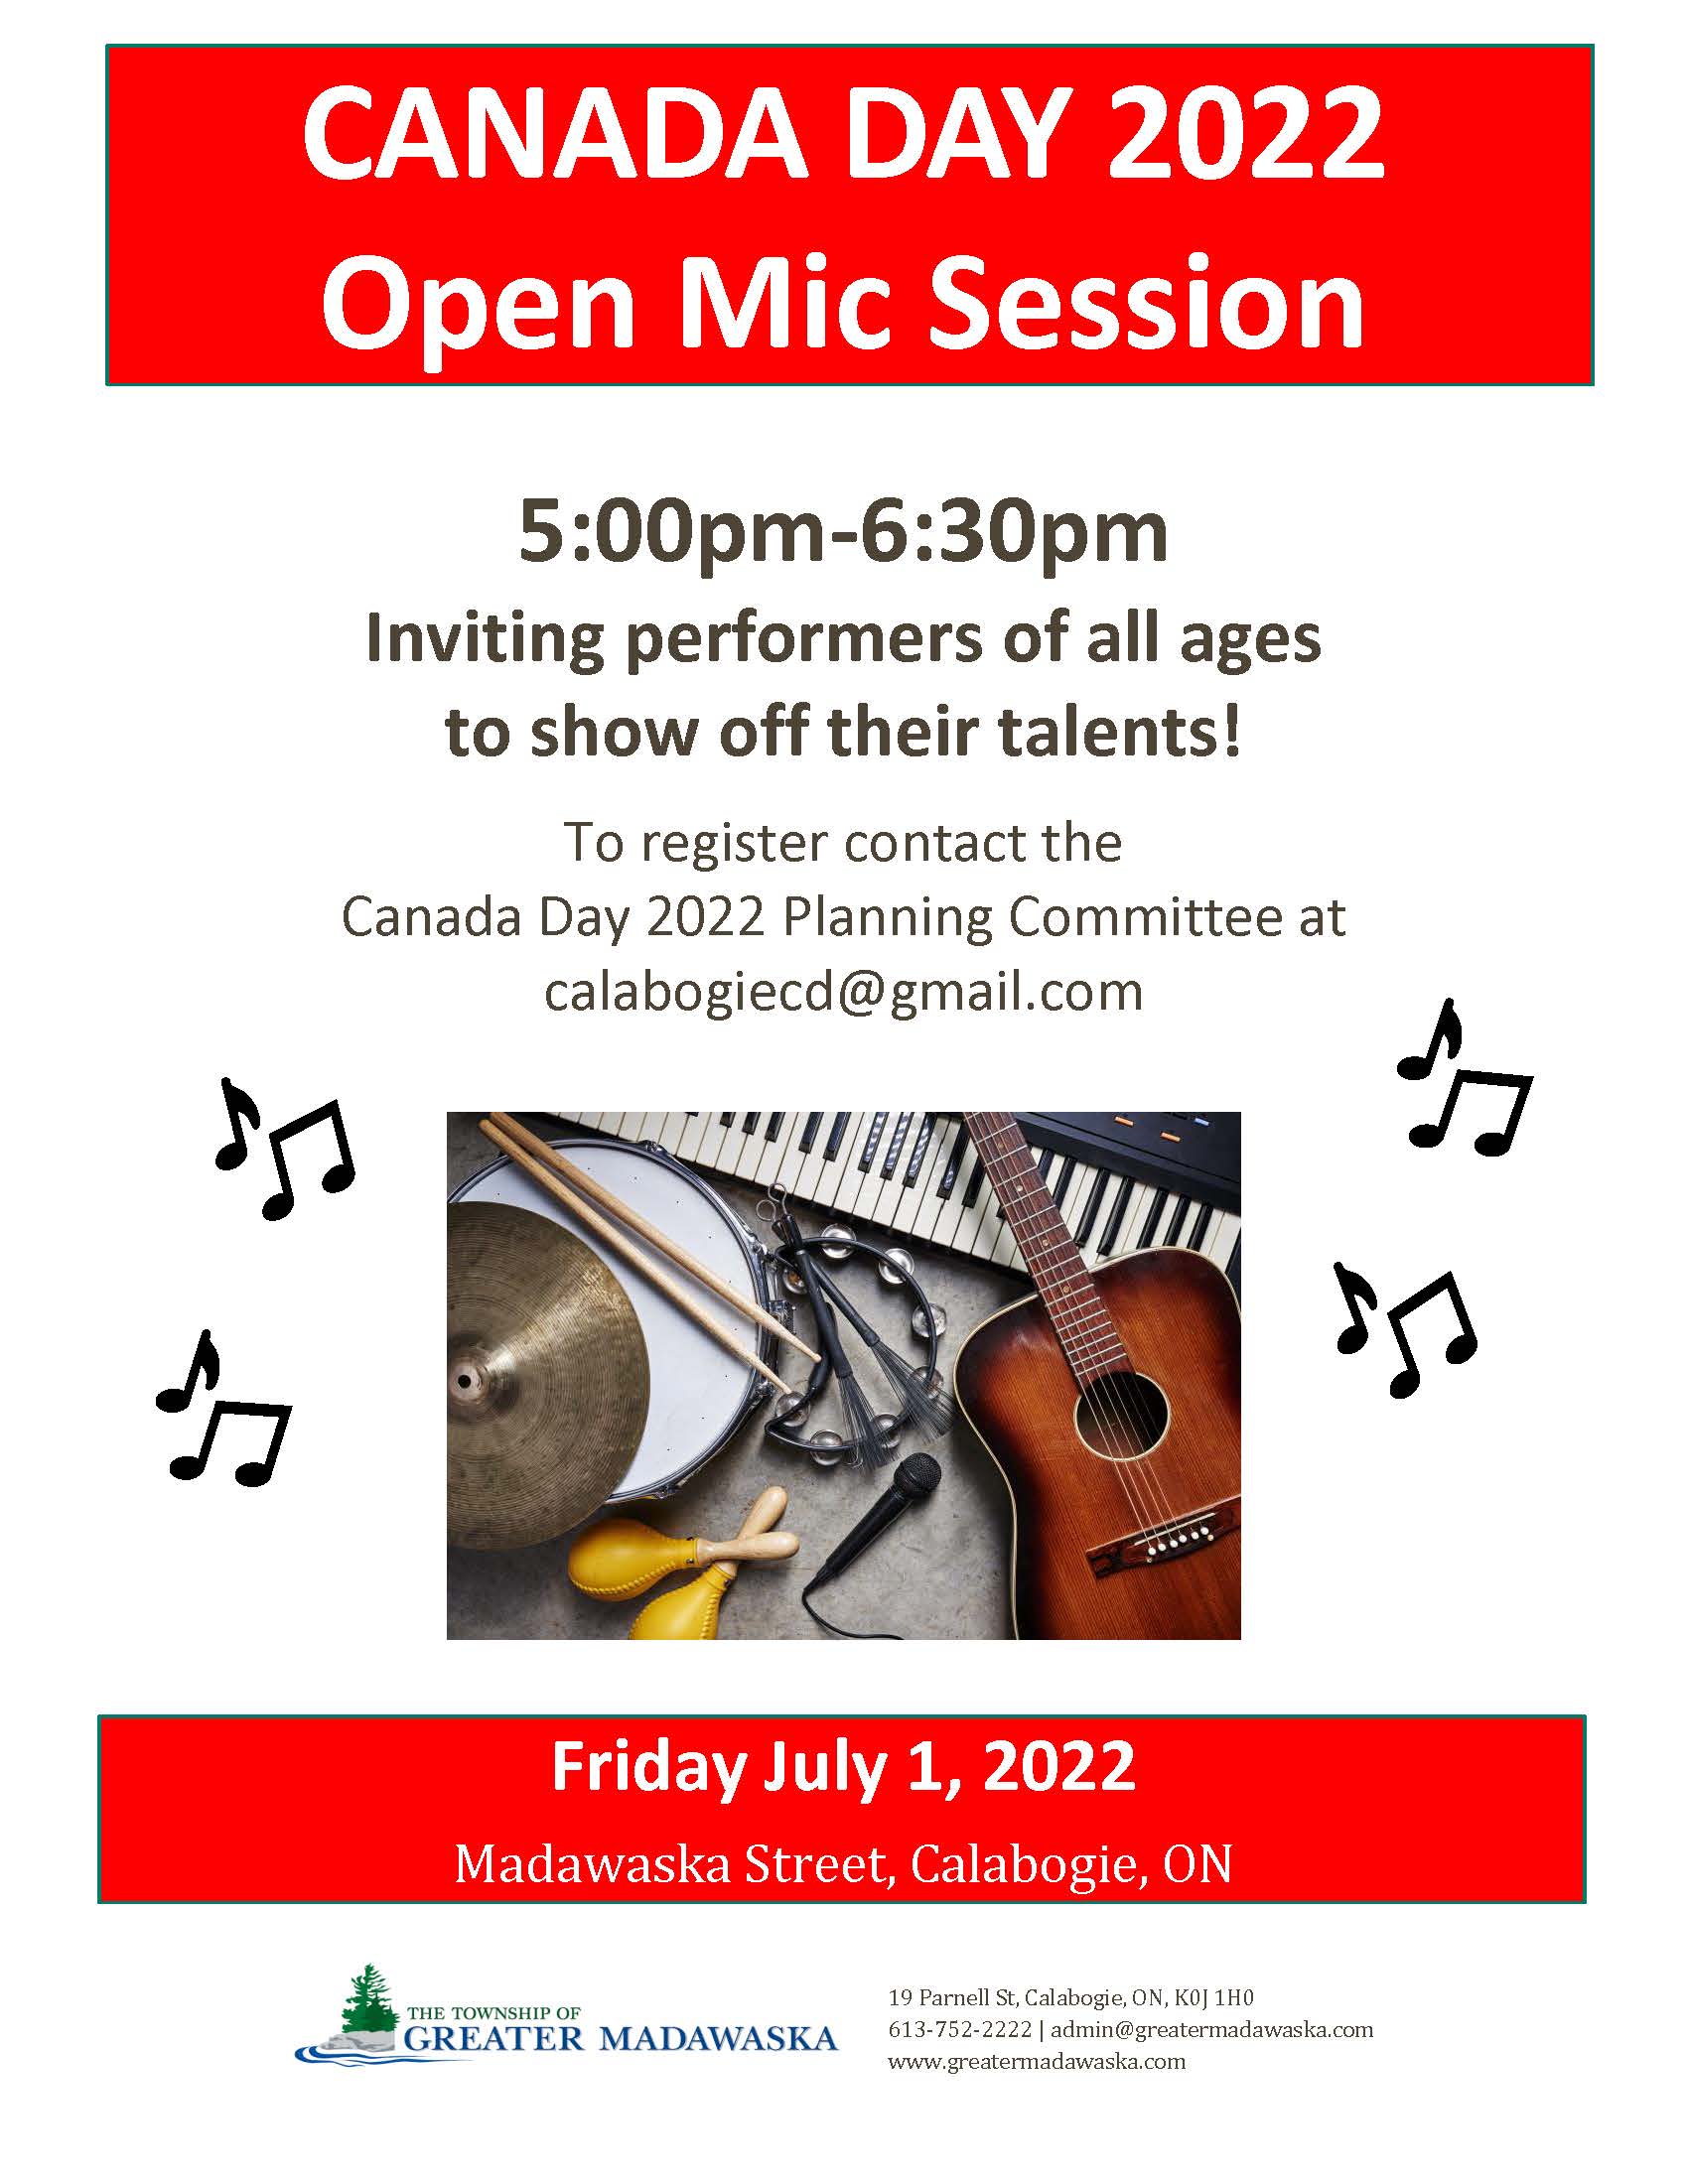 poster for canada day open mic session